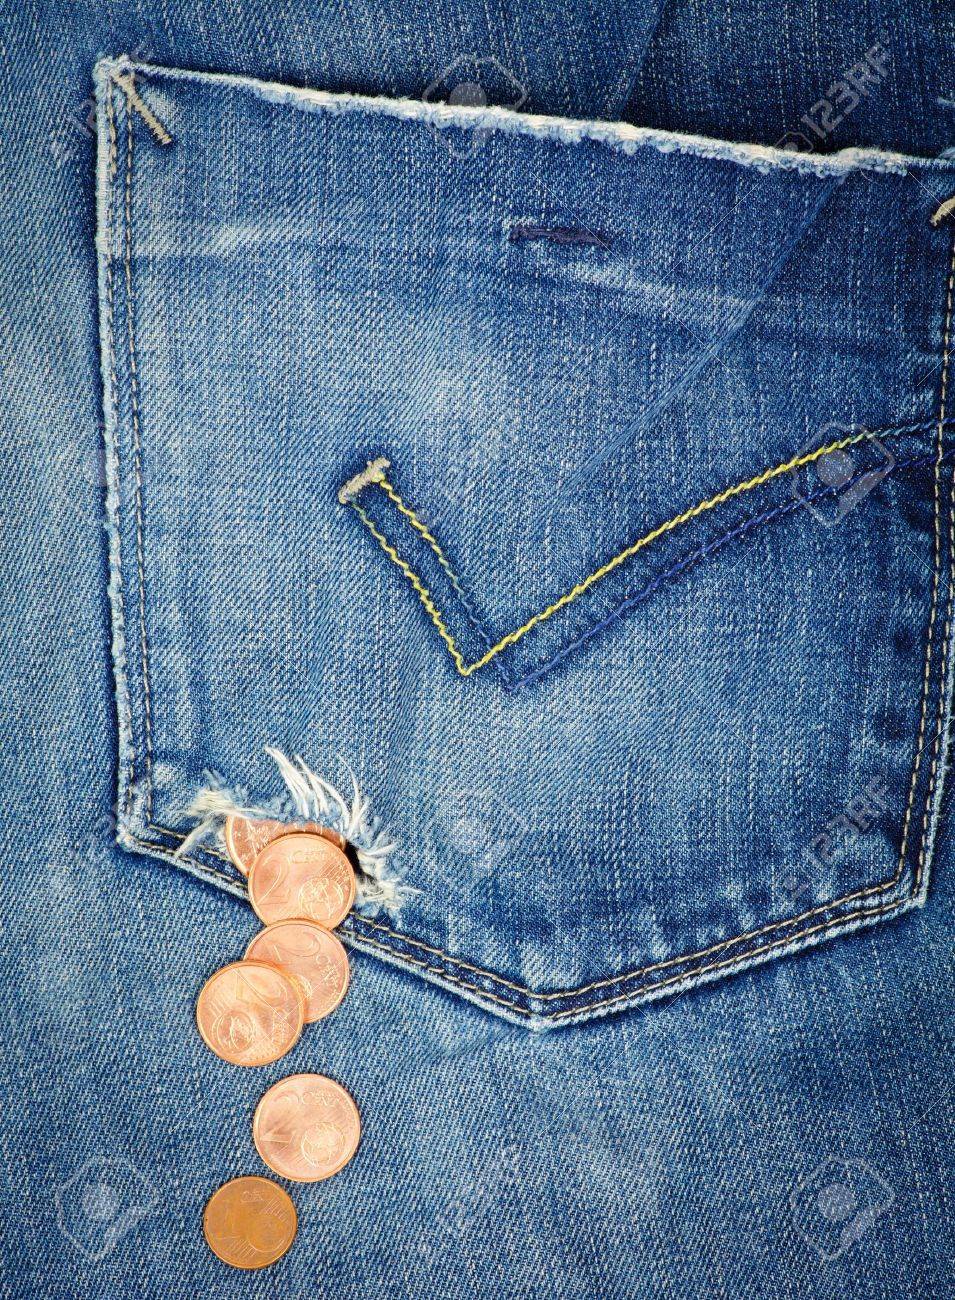 12151705-Money-fall-out-from-a-hole-in-jeans-pocket-Stock-Photo.jpg